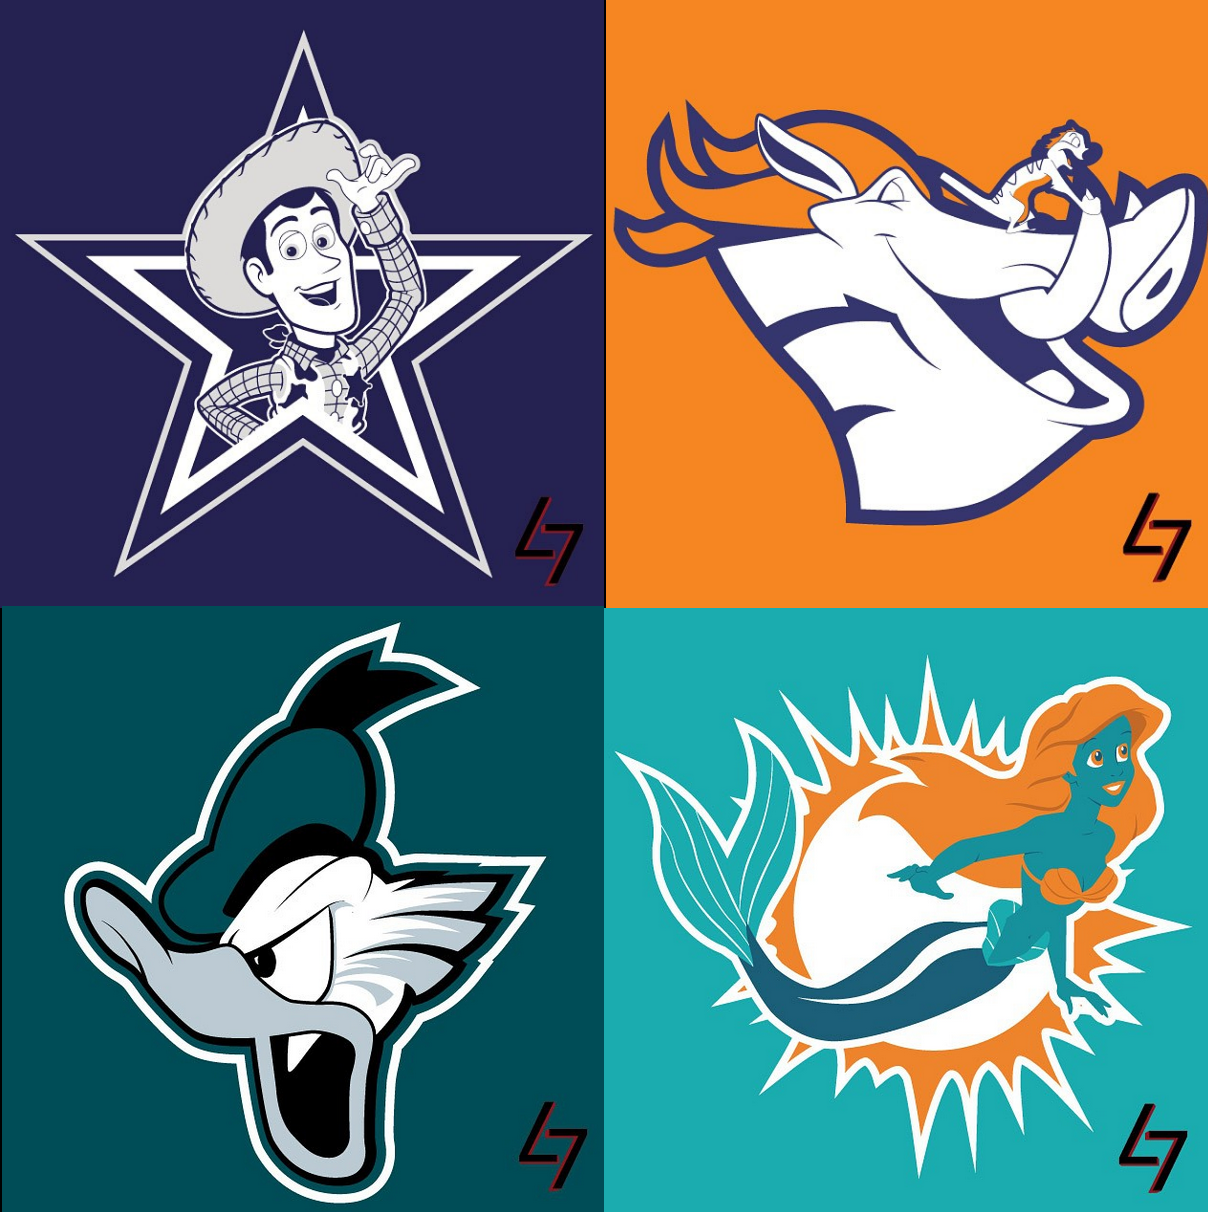 Are you ready for some Disney? NFL team logos mashup with classic